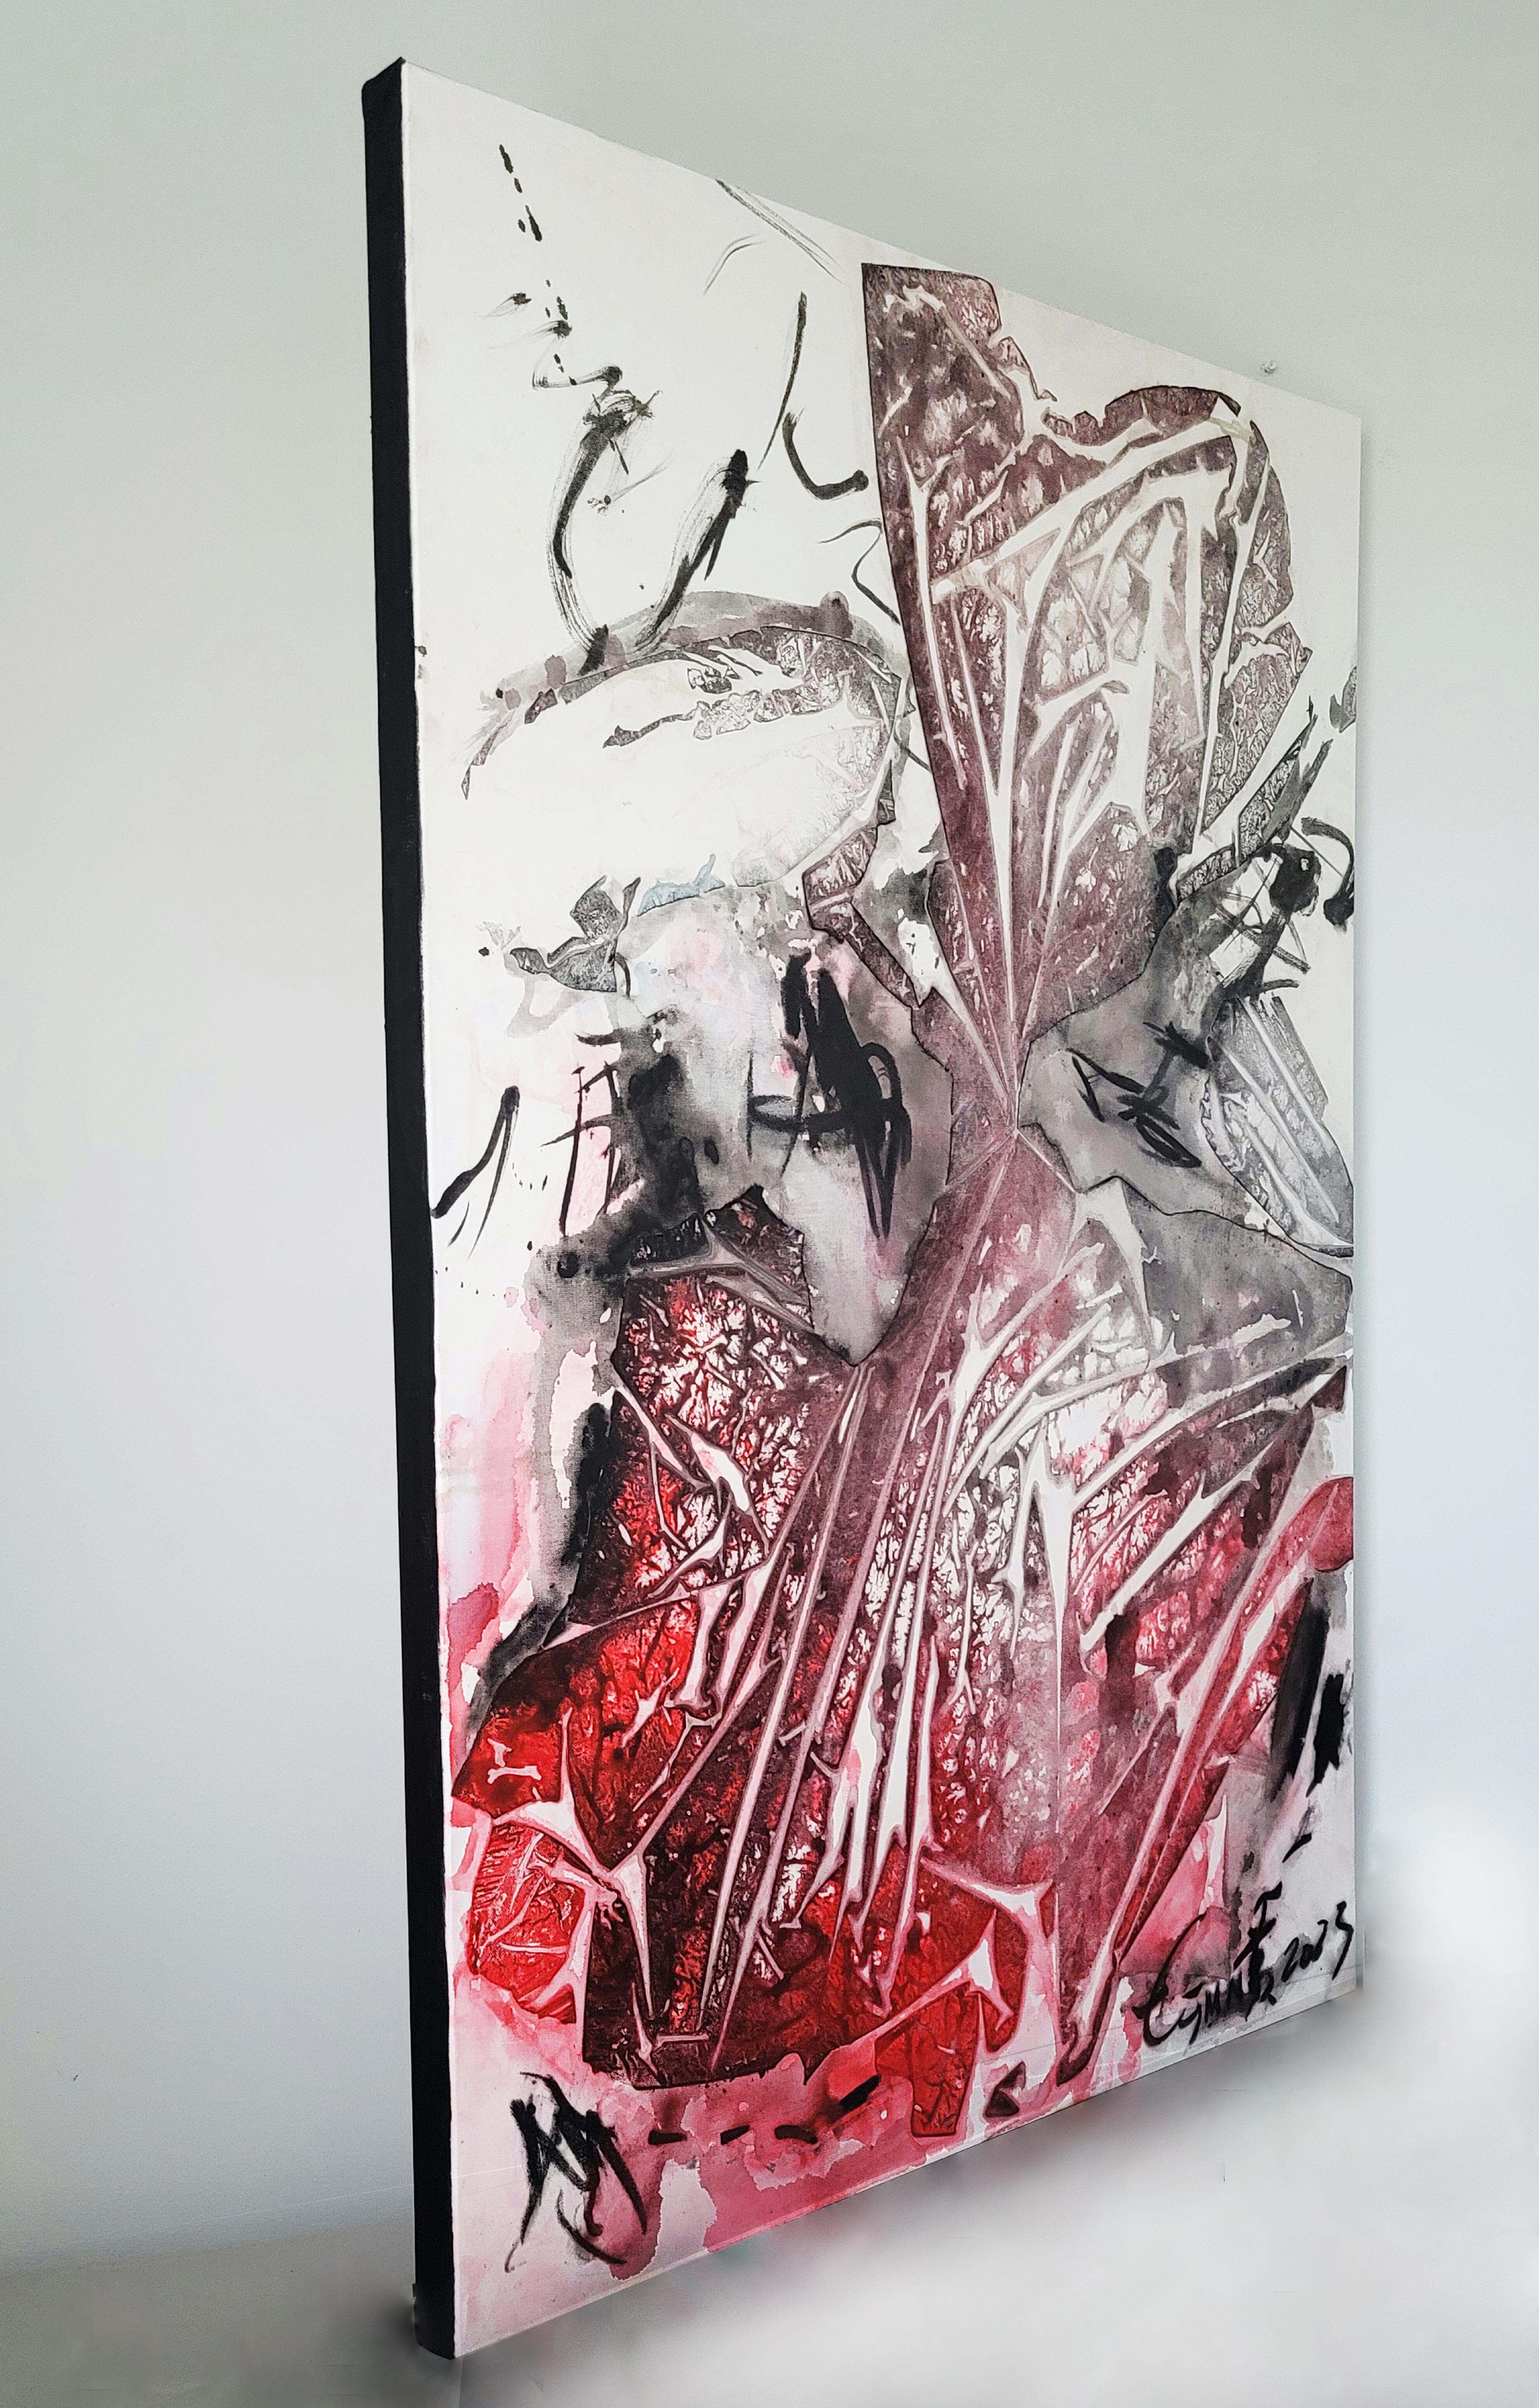 The vibrant red marks in this painting burst forth with passion and intensity, as if the heart is beating within the canvas.  The oblique composition and veining traces of breathing add a sense of movement and flow, as if the very essence of love is